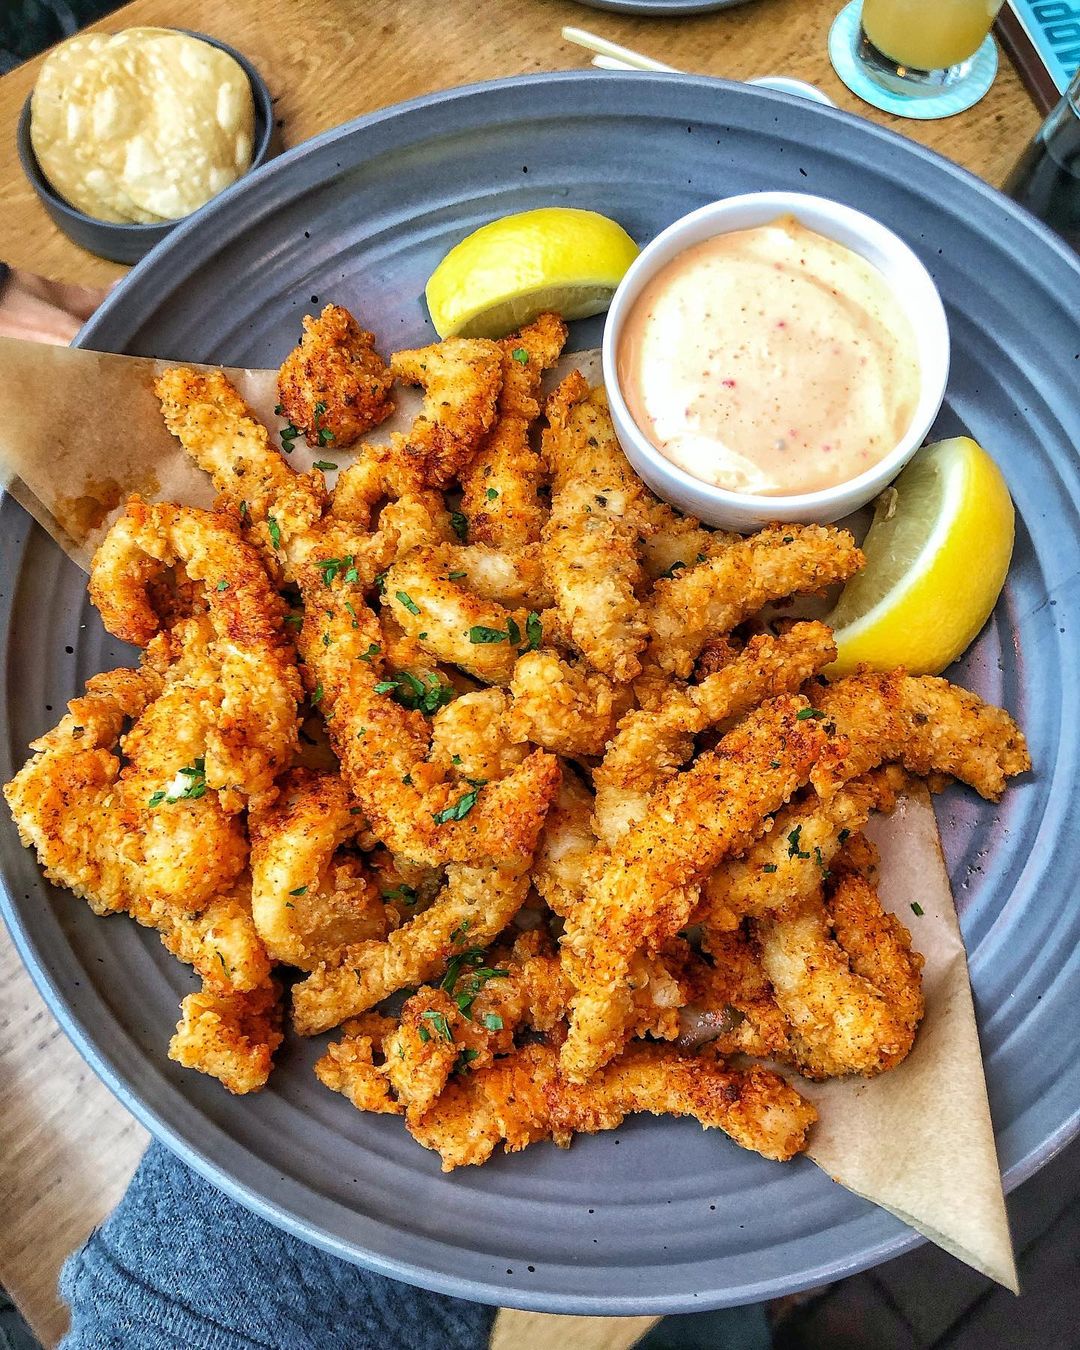 Calamari fries from Roe Seafood of Long Beach, CA. Photo by Instagram user @cleanyourplaterx.